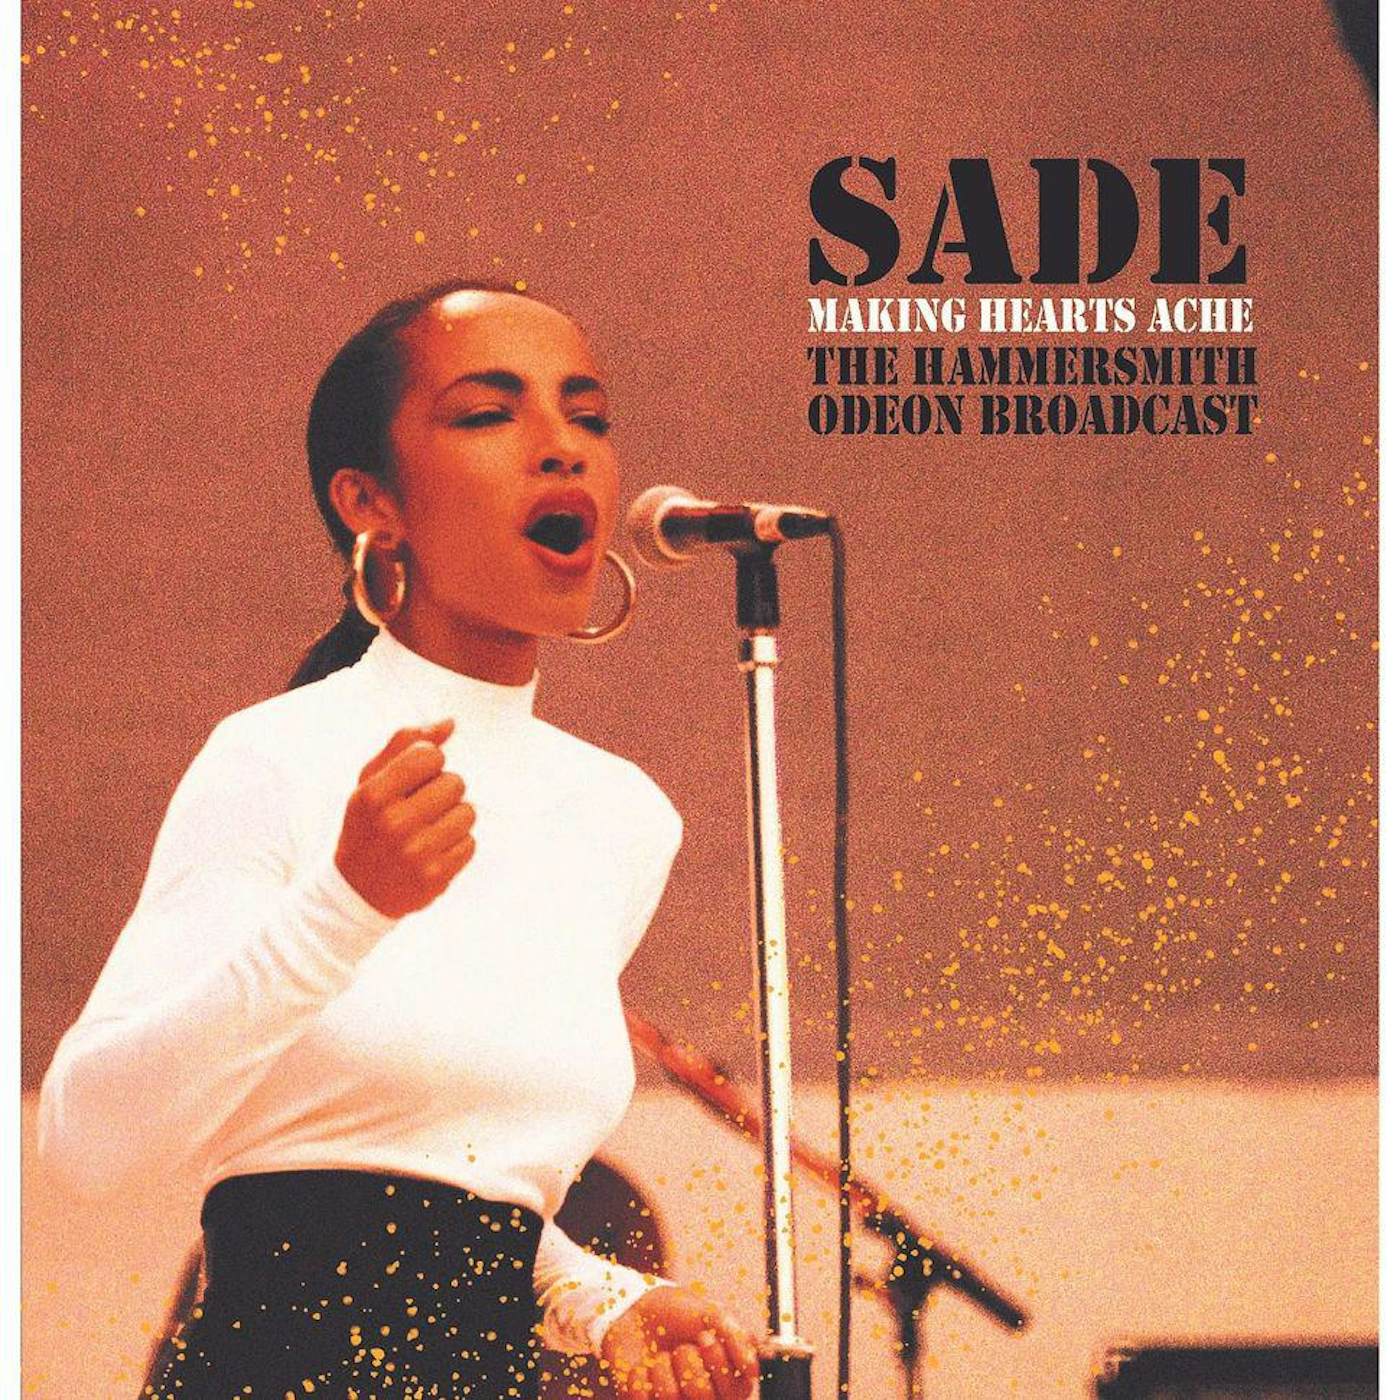 Sade Live At The Hammersmith Odeon, London, December 29, 1984 - FM Broadcast - MIL Vinyl Record